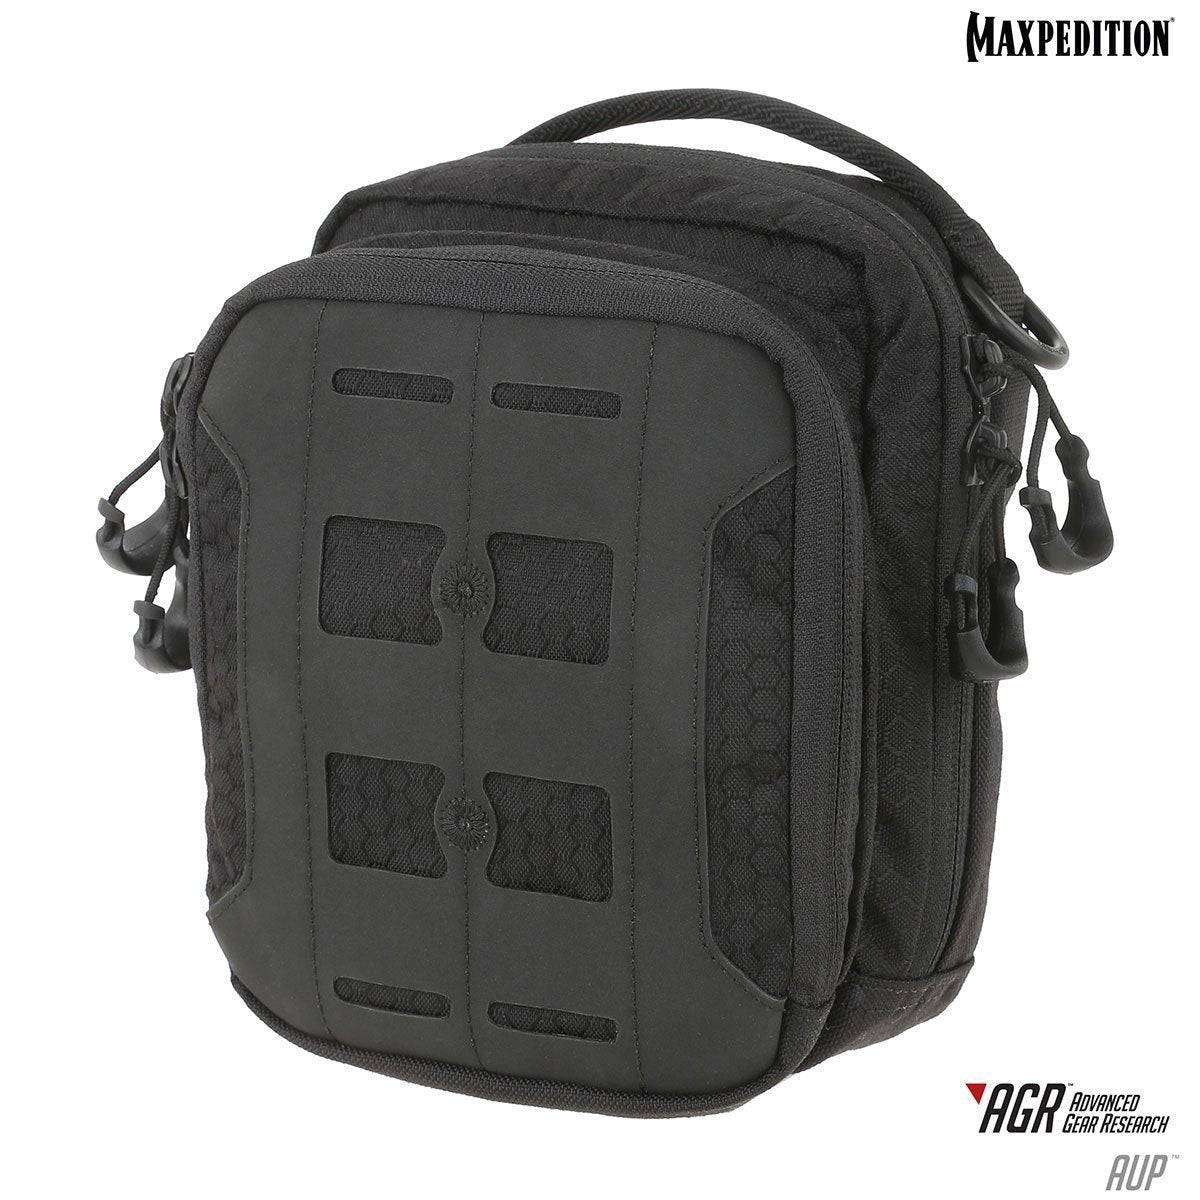 Maxpedition AUP Accordion Utility Pouch Accessories Maxpedition Gray Tactical Gear Supplier Tactical Distributors Australia